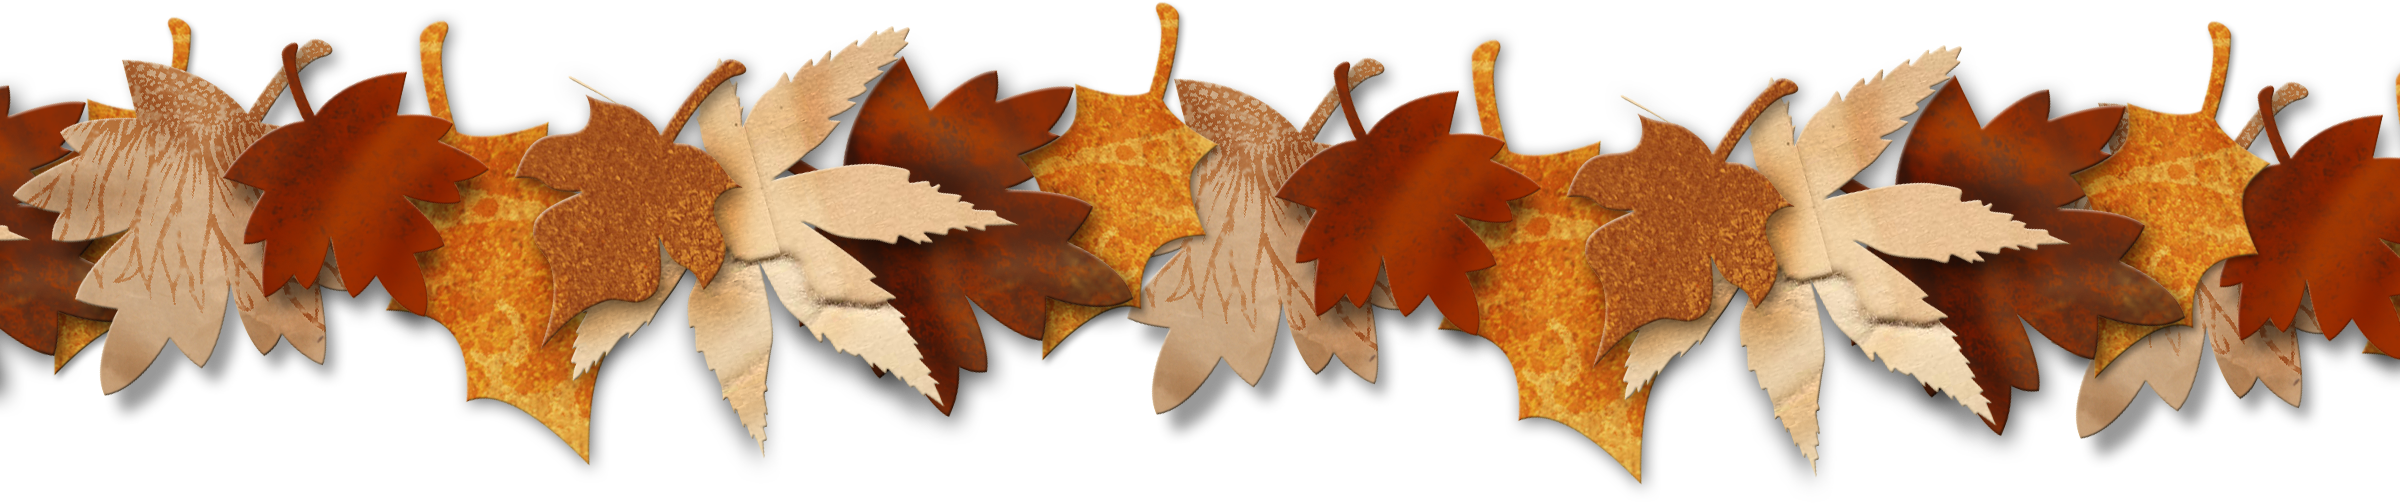 Leaf clip art everyday. Fall leaves and pumpkins border png